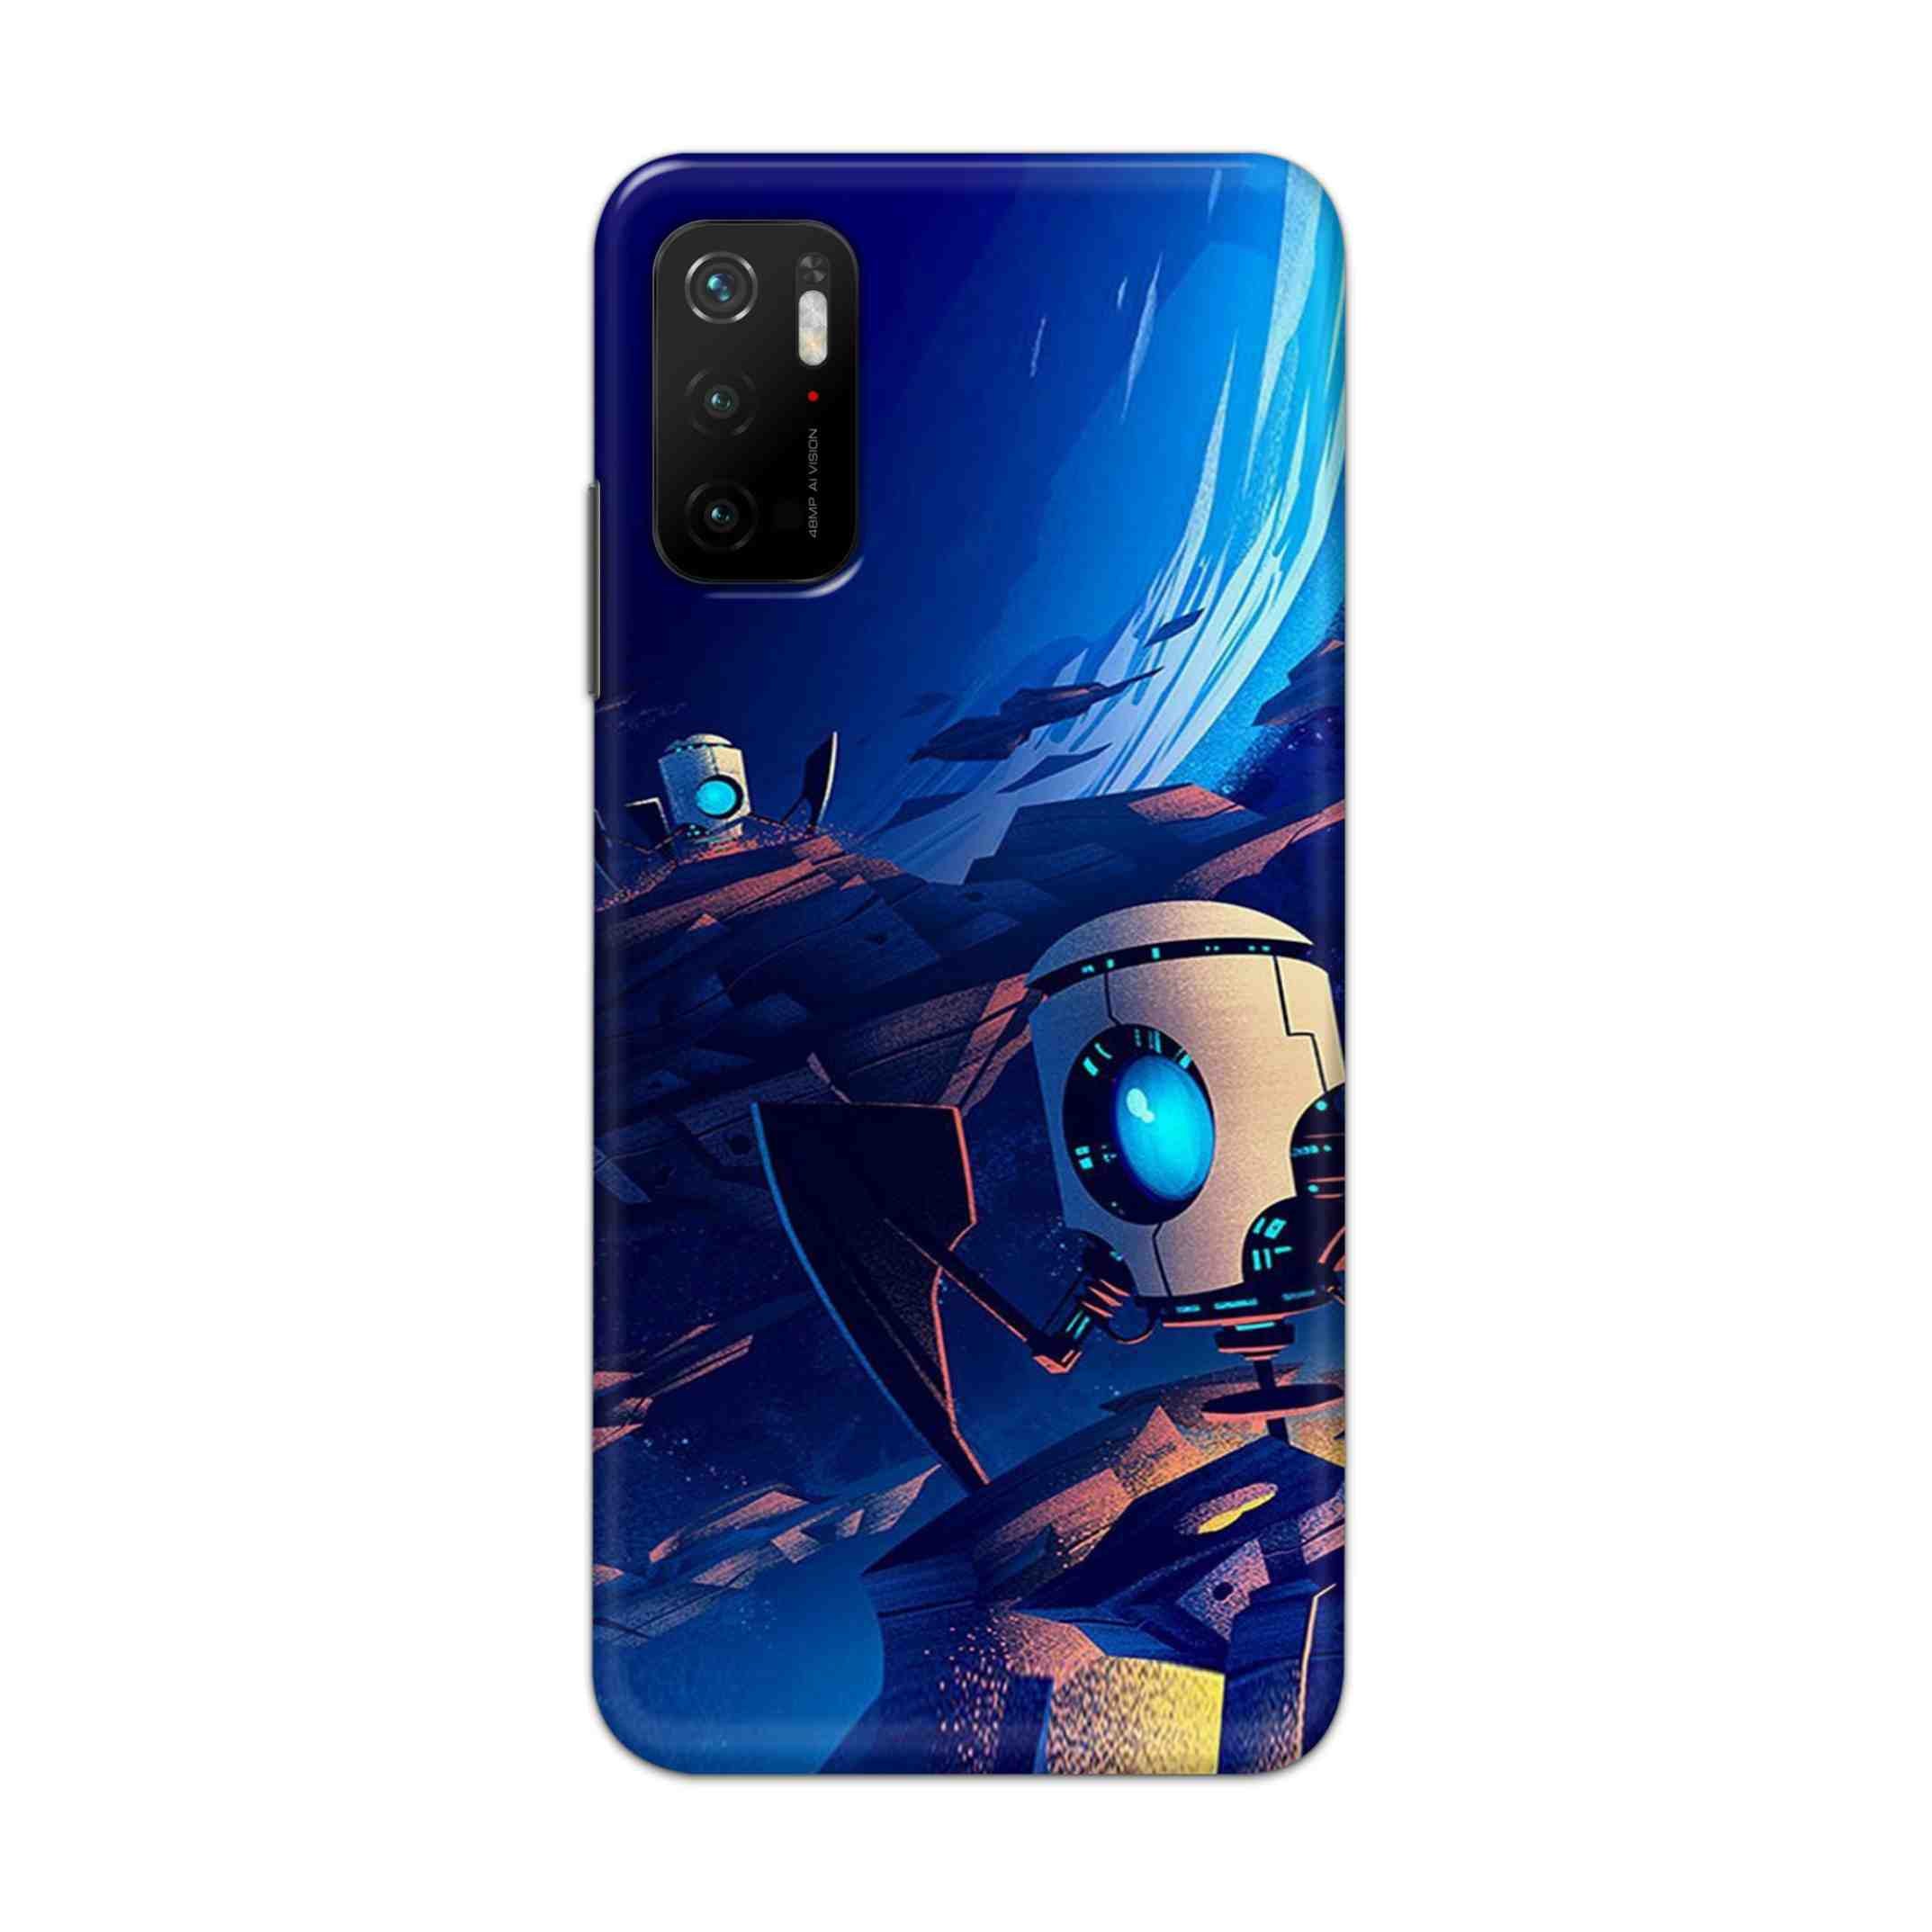 Buy Spaceship Robot Hard Back Mobile Phone Case Cover For Poco M3 Pro 5G Online